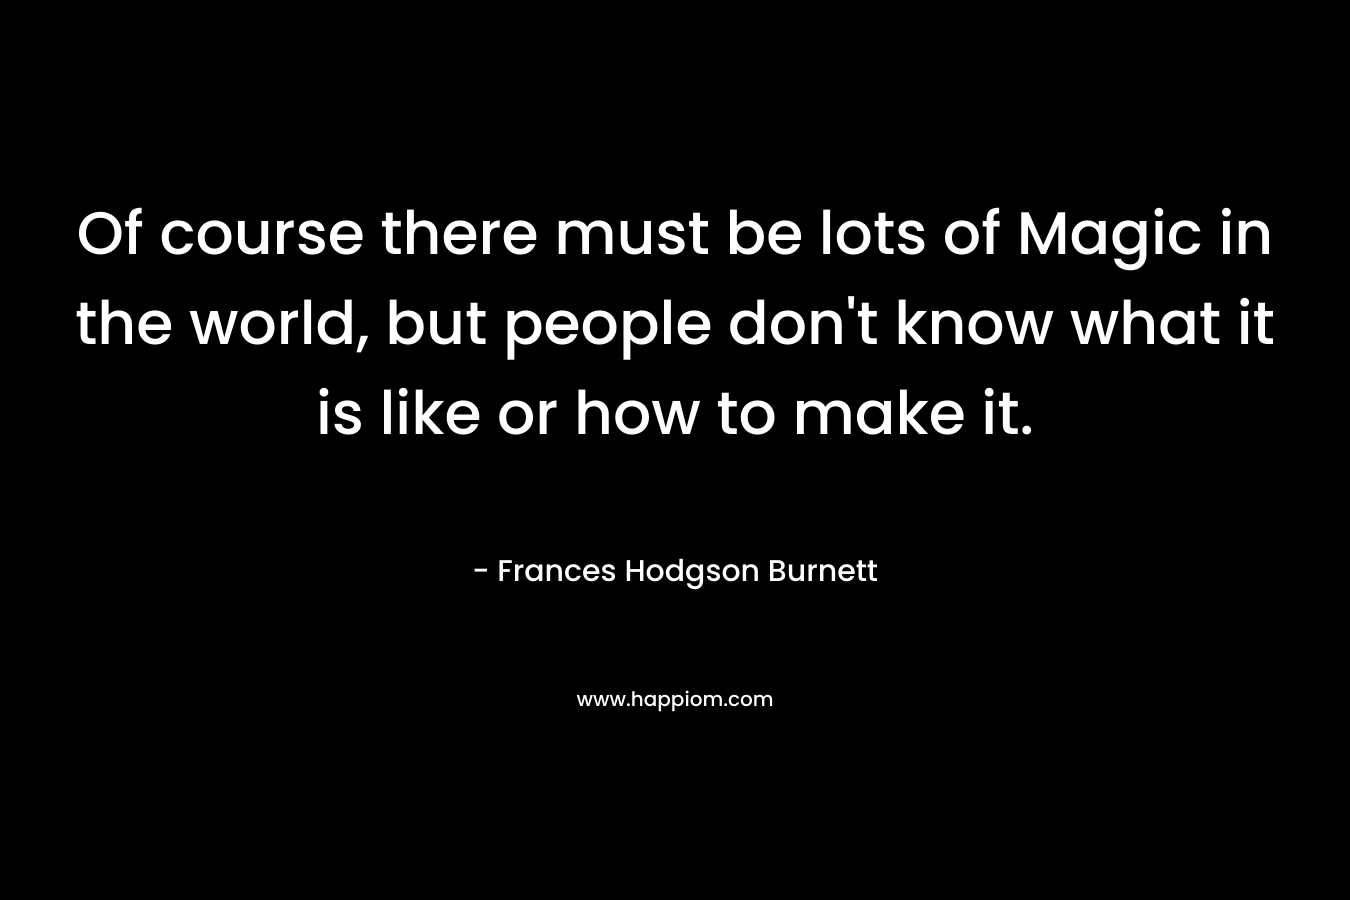 Of course there must be lots of Magic in the world, but people don't know what it is like or how to make it.